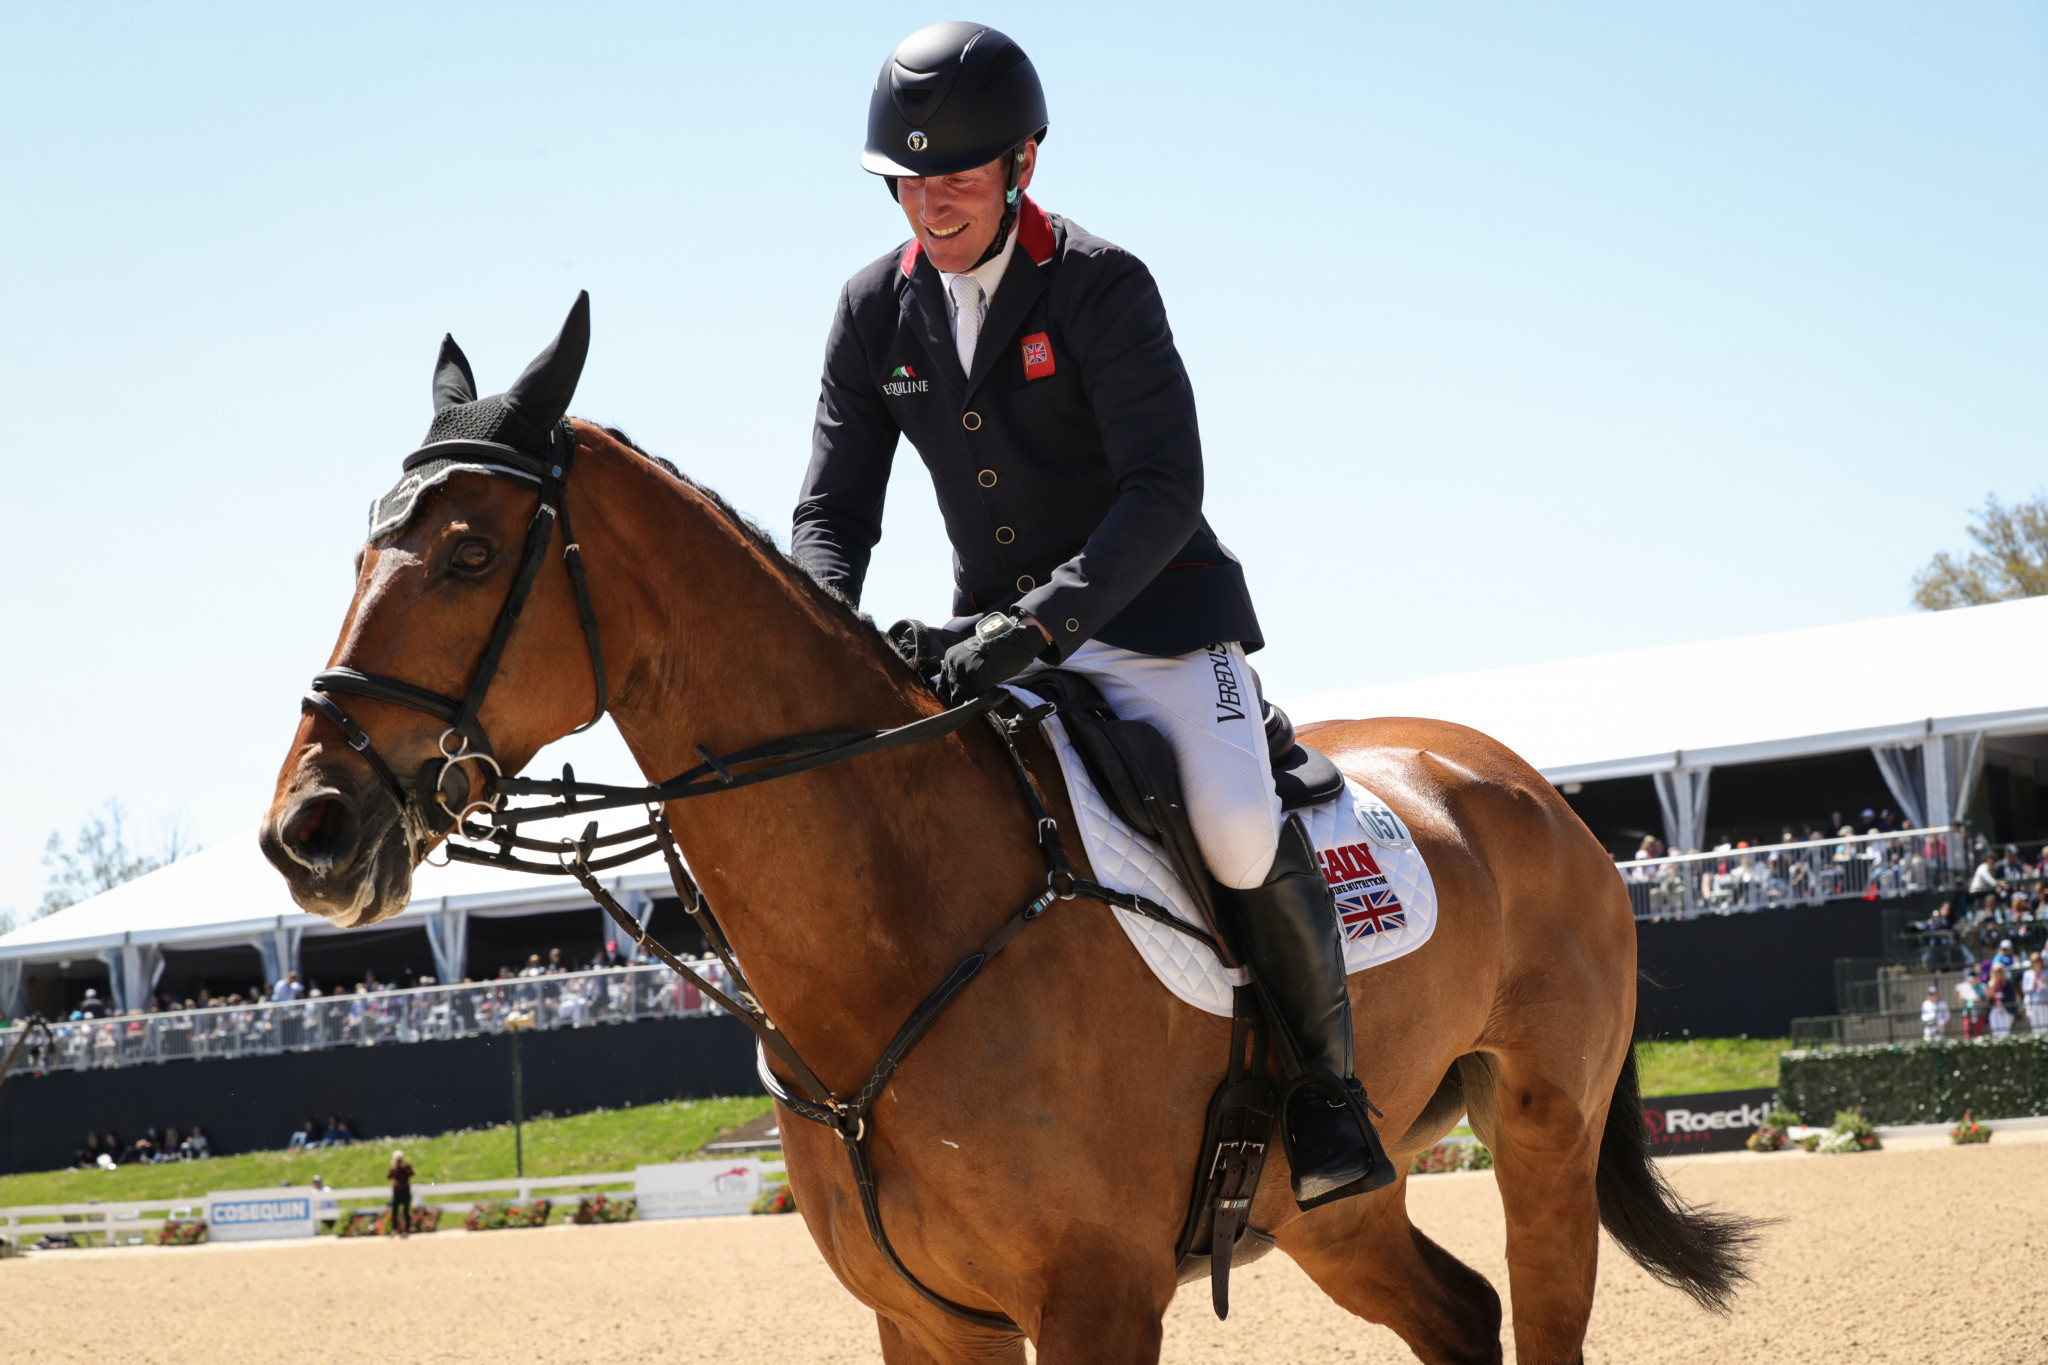 Oliver Townend remains in second place after leading following the dressage ©Getty Images